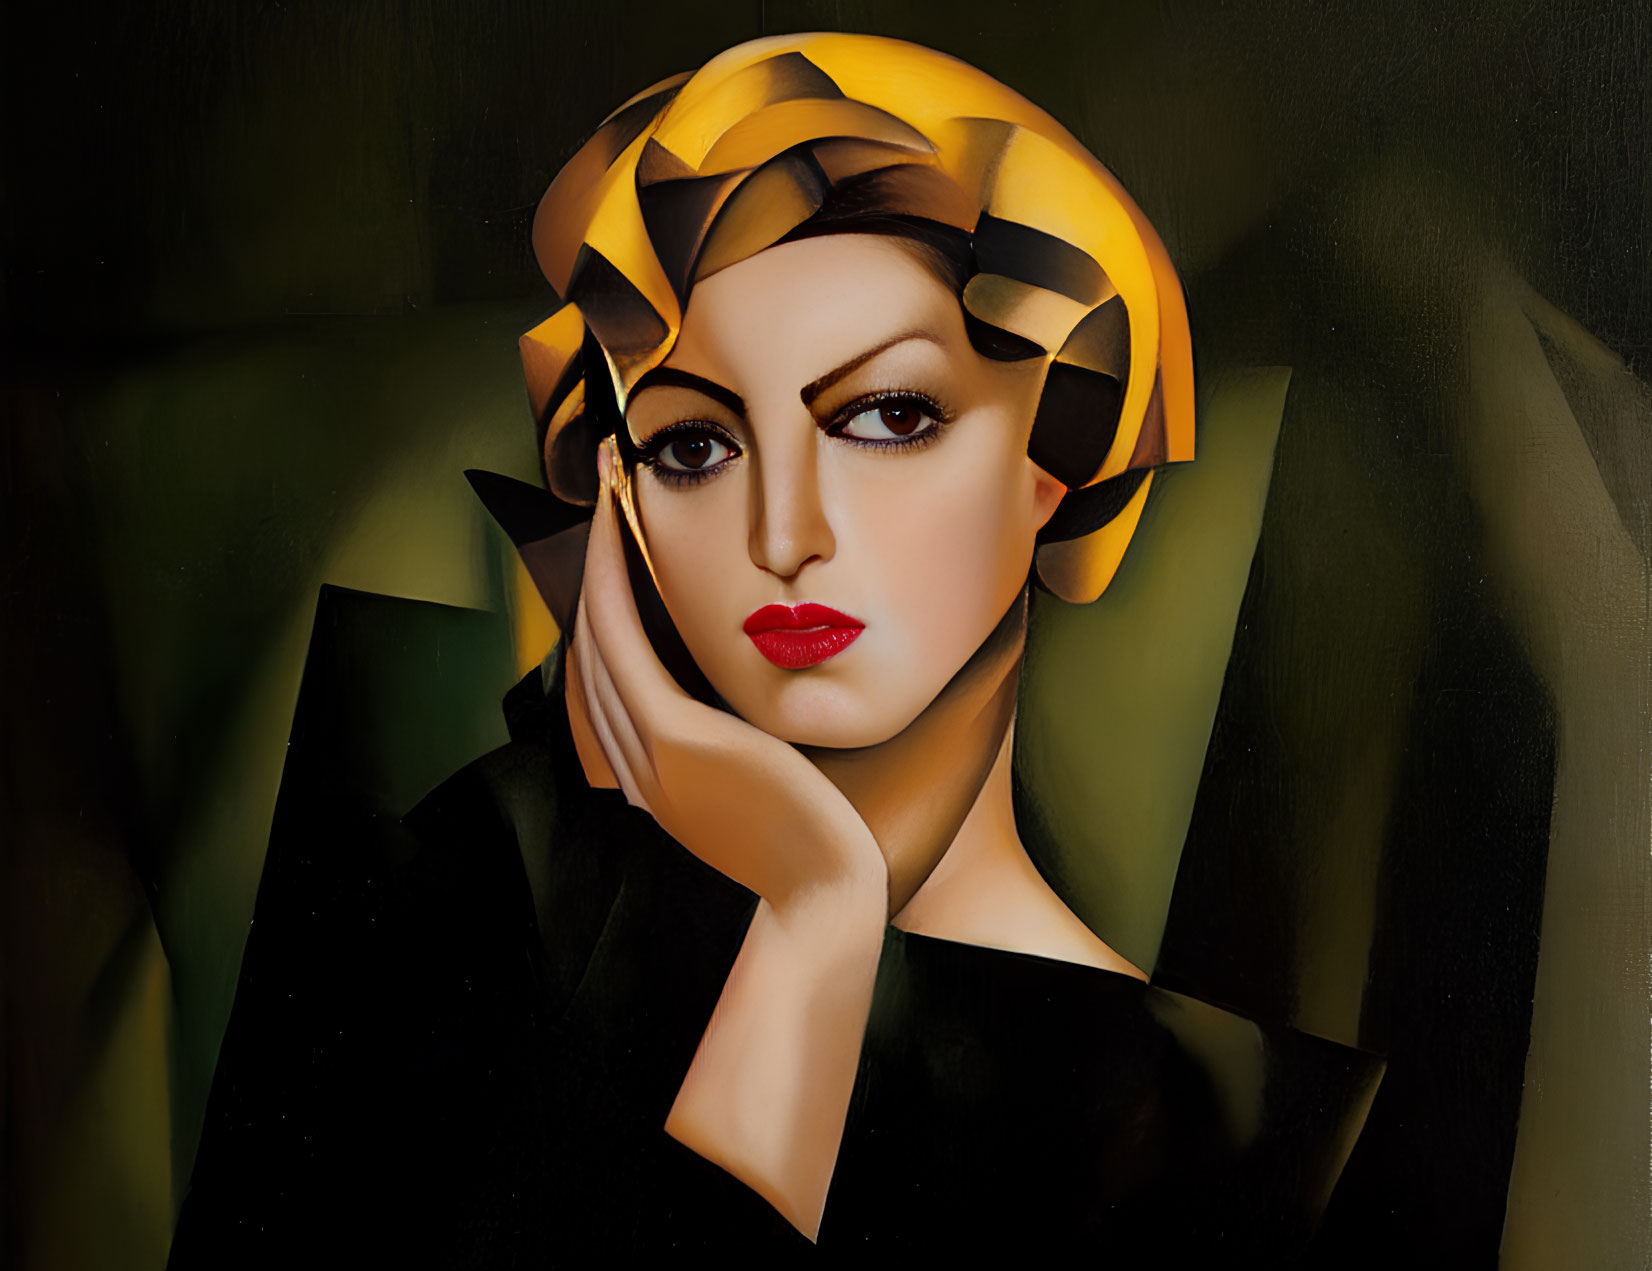 Stylized portrait of a woman with striking gaze and red lips